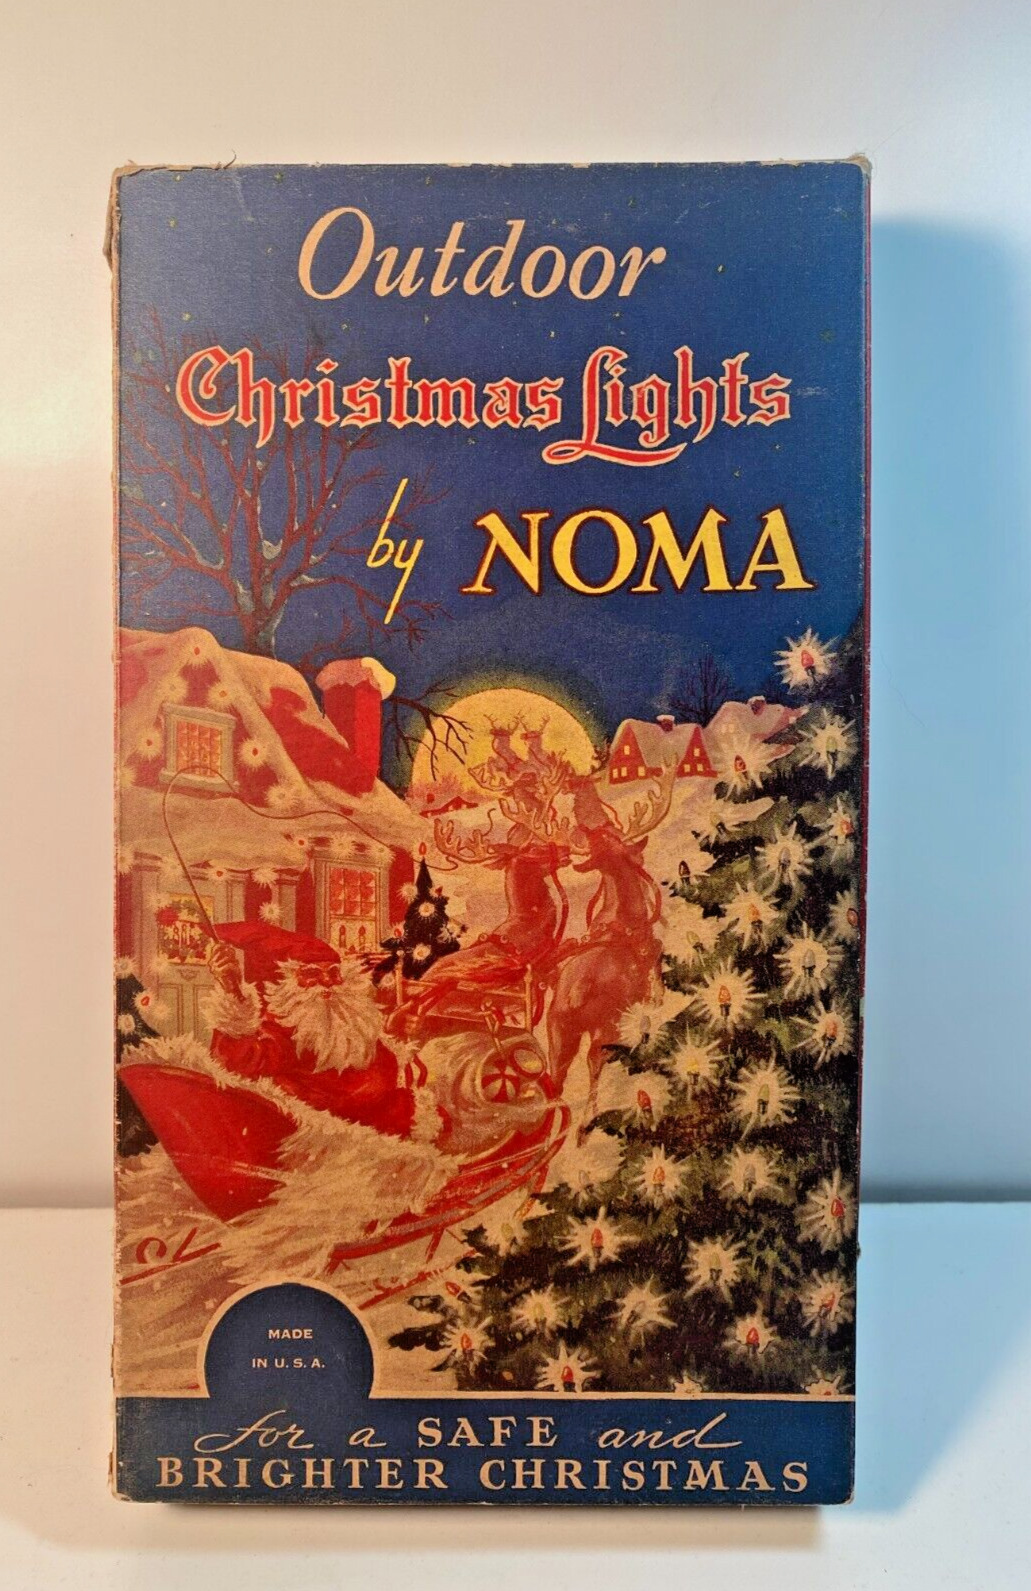 Vintage Noma Outdoor Christmas Lights Original BOX ONLY No Contents